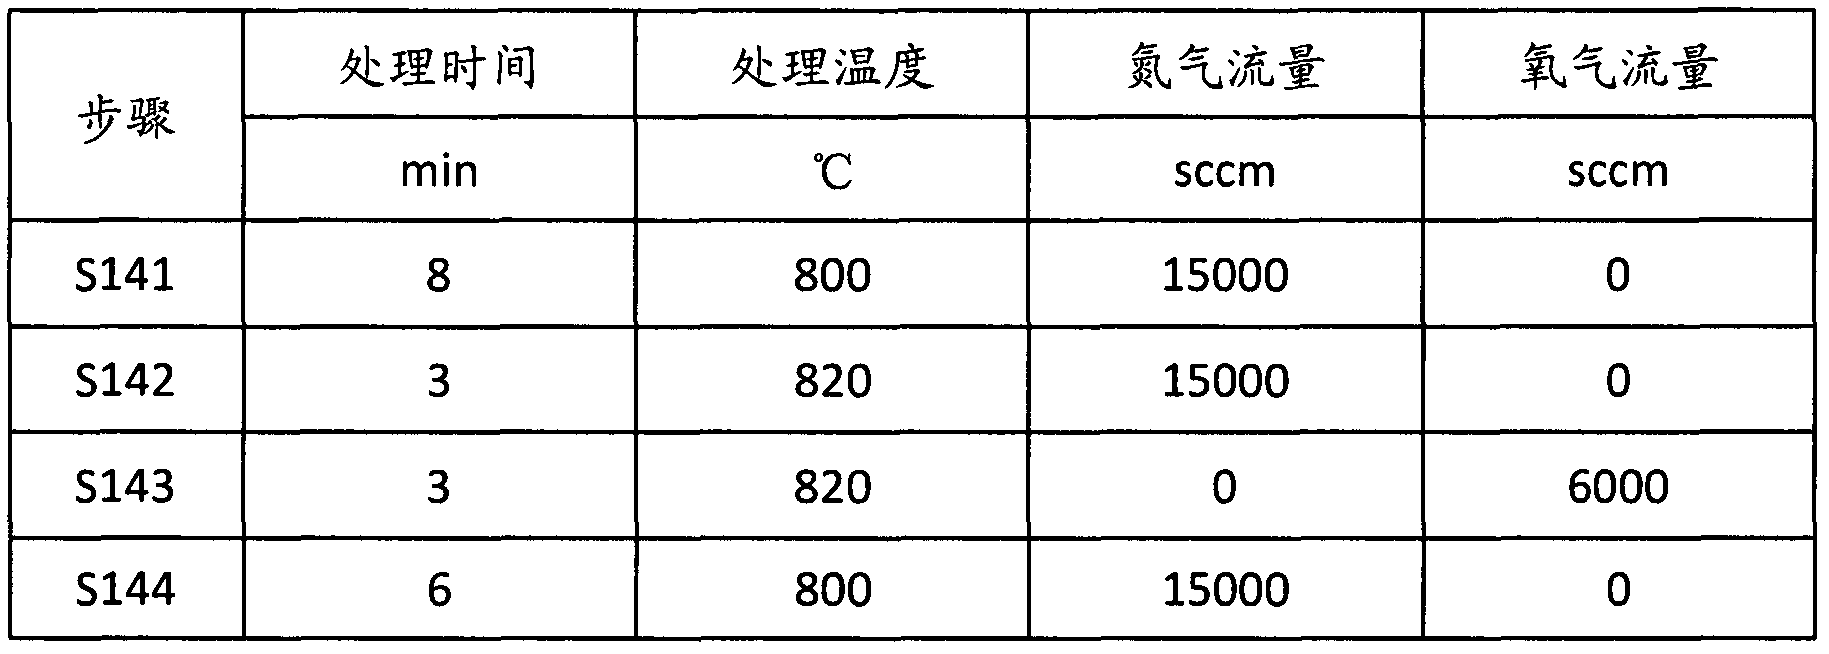 Treatment method and etching method of crystalline silicon wafer with oil stains